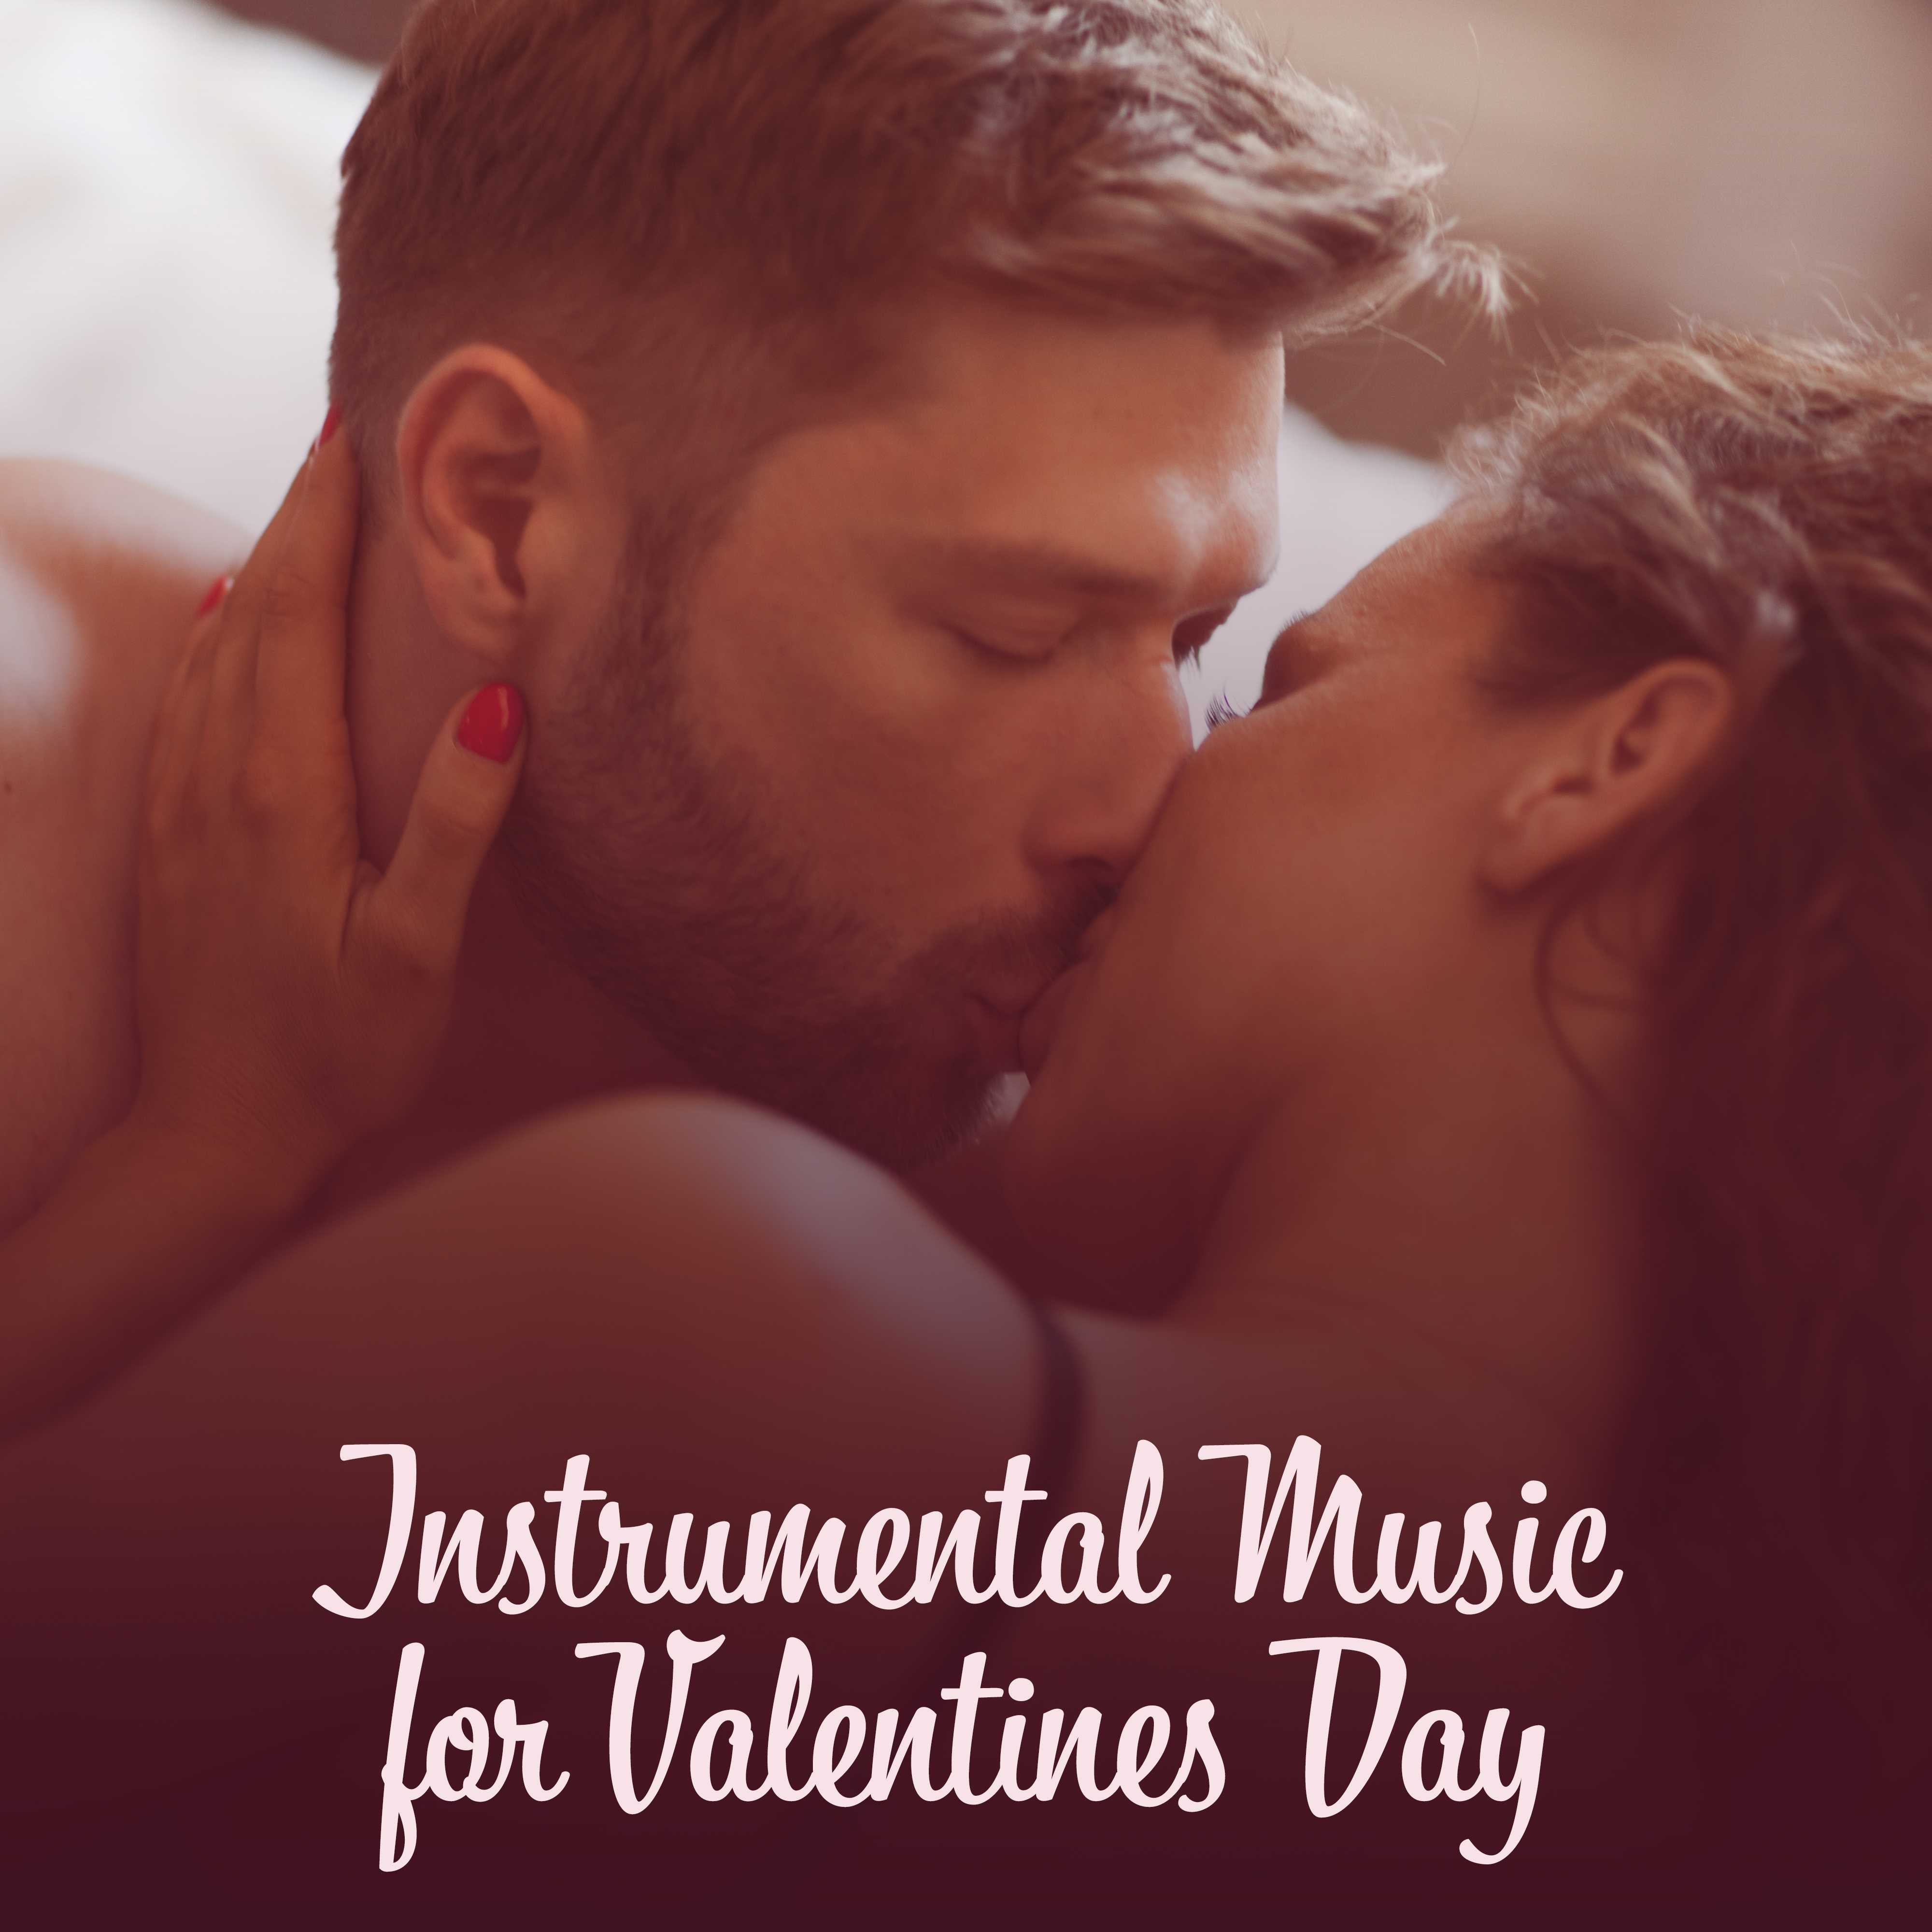 Instrumental Music for Valentines Day  Sensual Jazz Music, Romantic Melodies for Lovers, Erotic Jazz Sounds 2019